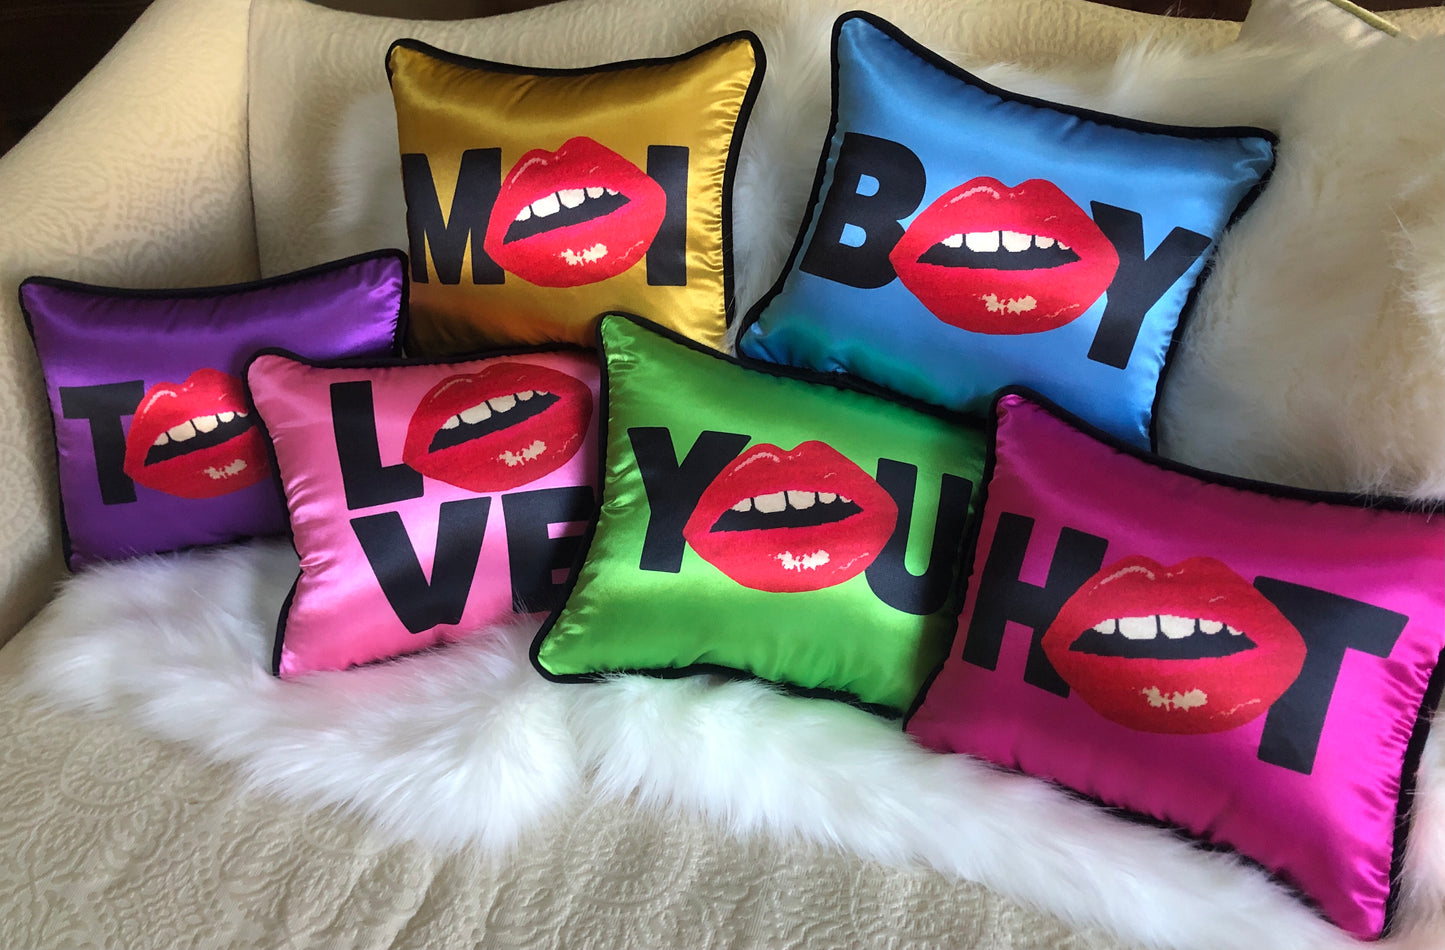 jewel-toned hot pink satin pillow with black HOT and red lips for O